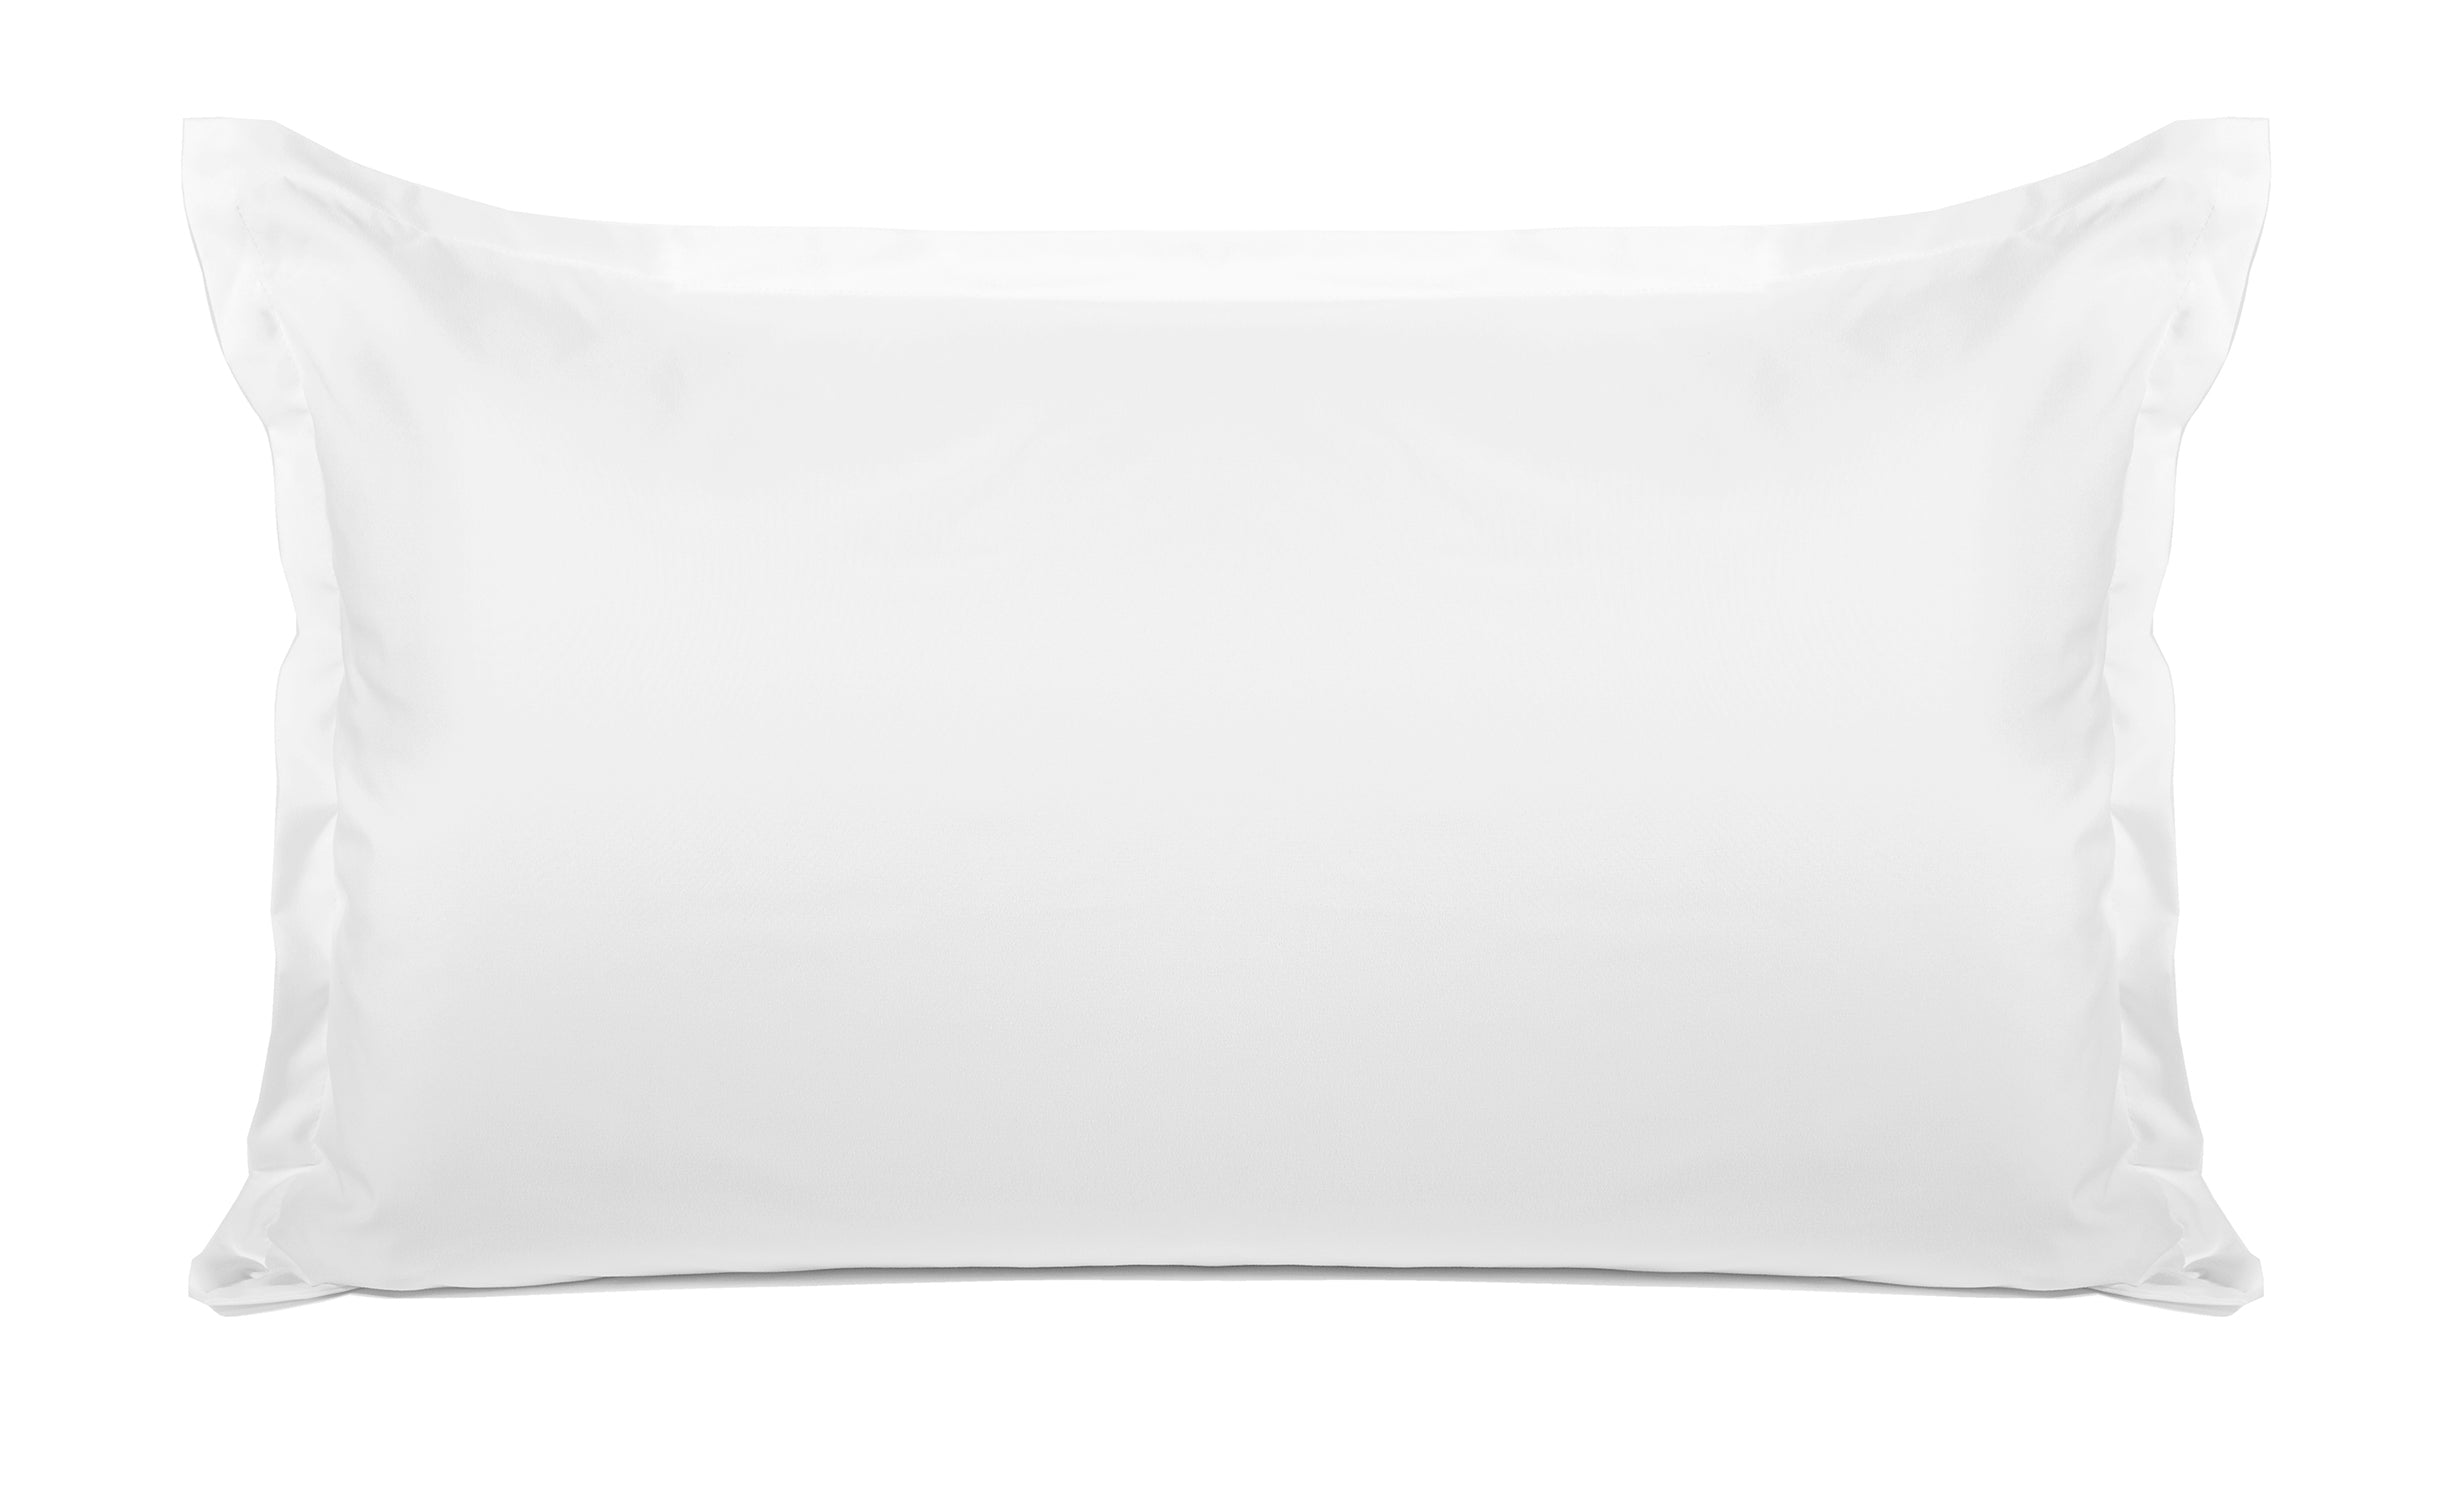 Modern (Monogram) - Personalized Pillowcase Collection-Di Lewis